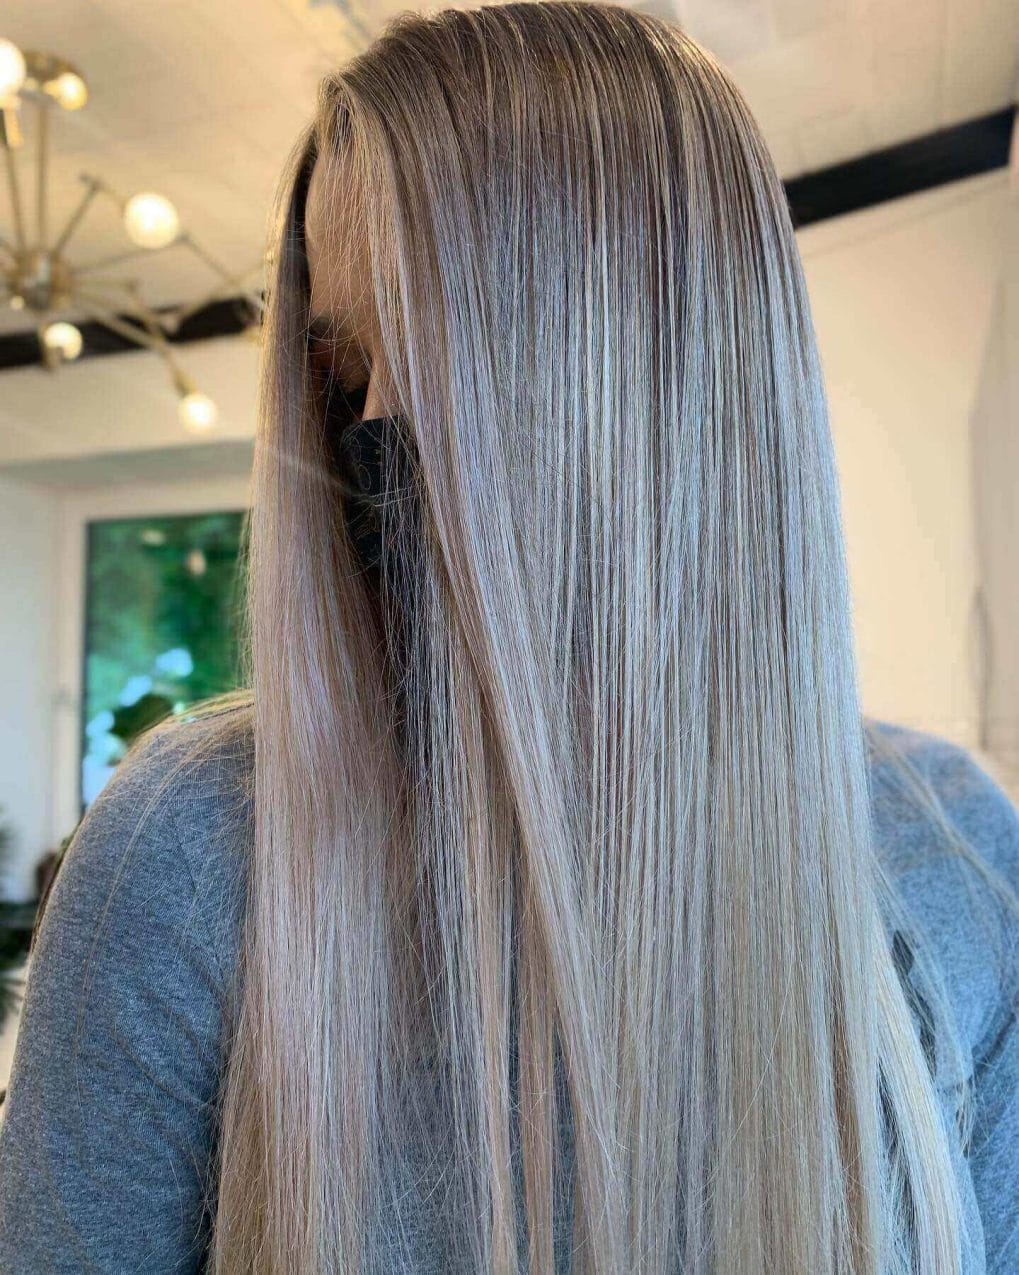 Sleek straight hair with balayage from dark roots to light ethereal ends.